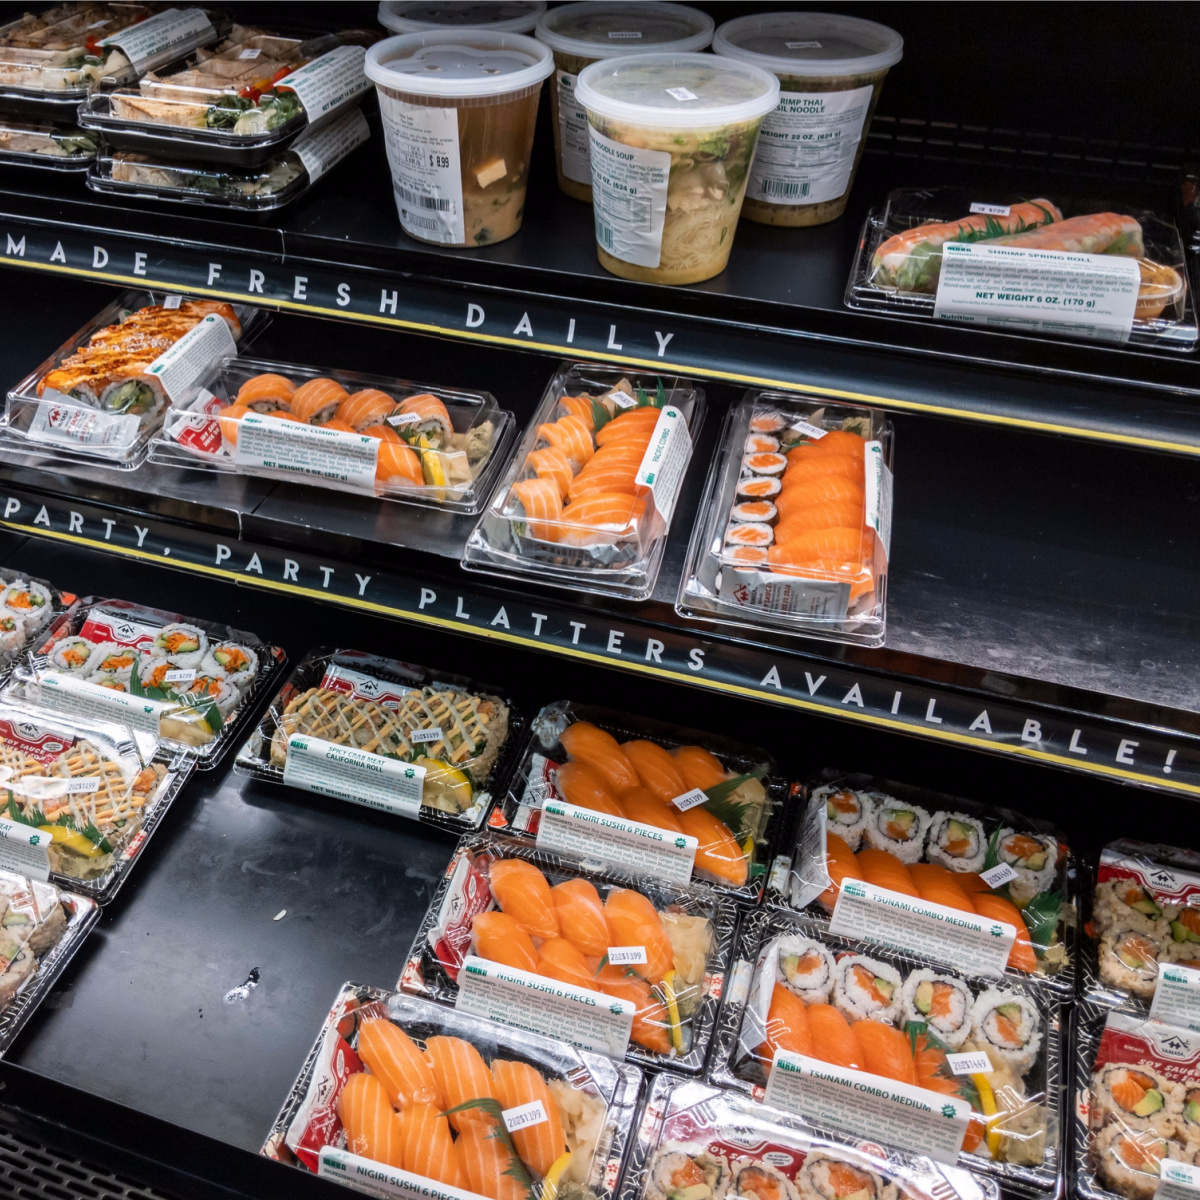 Prepared Meals at Whole Foods Market